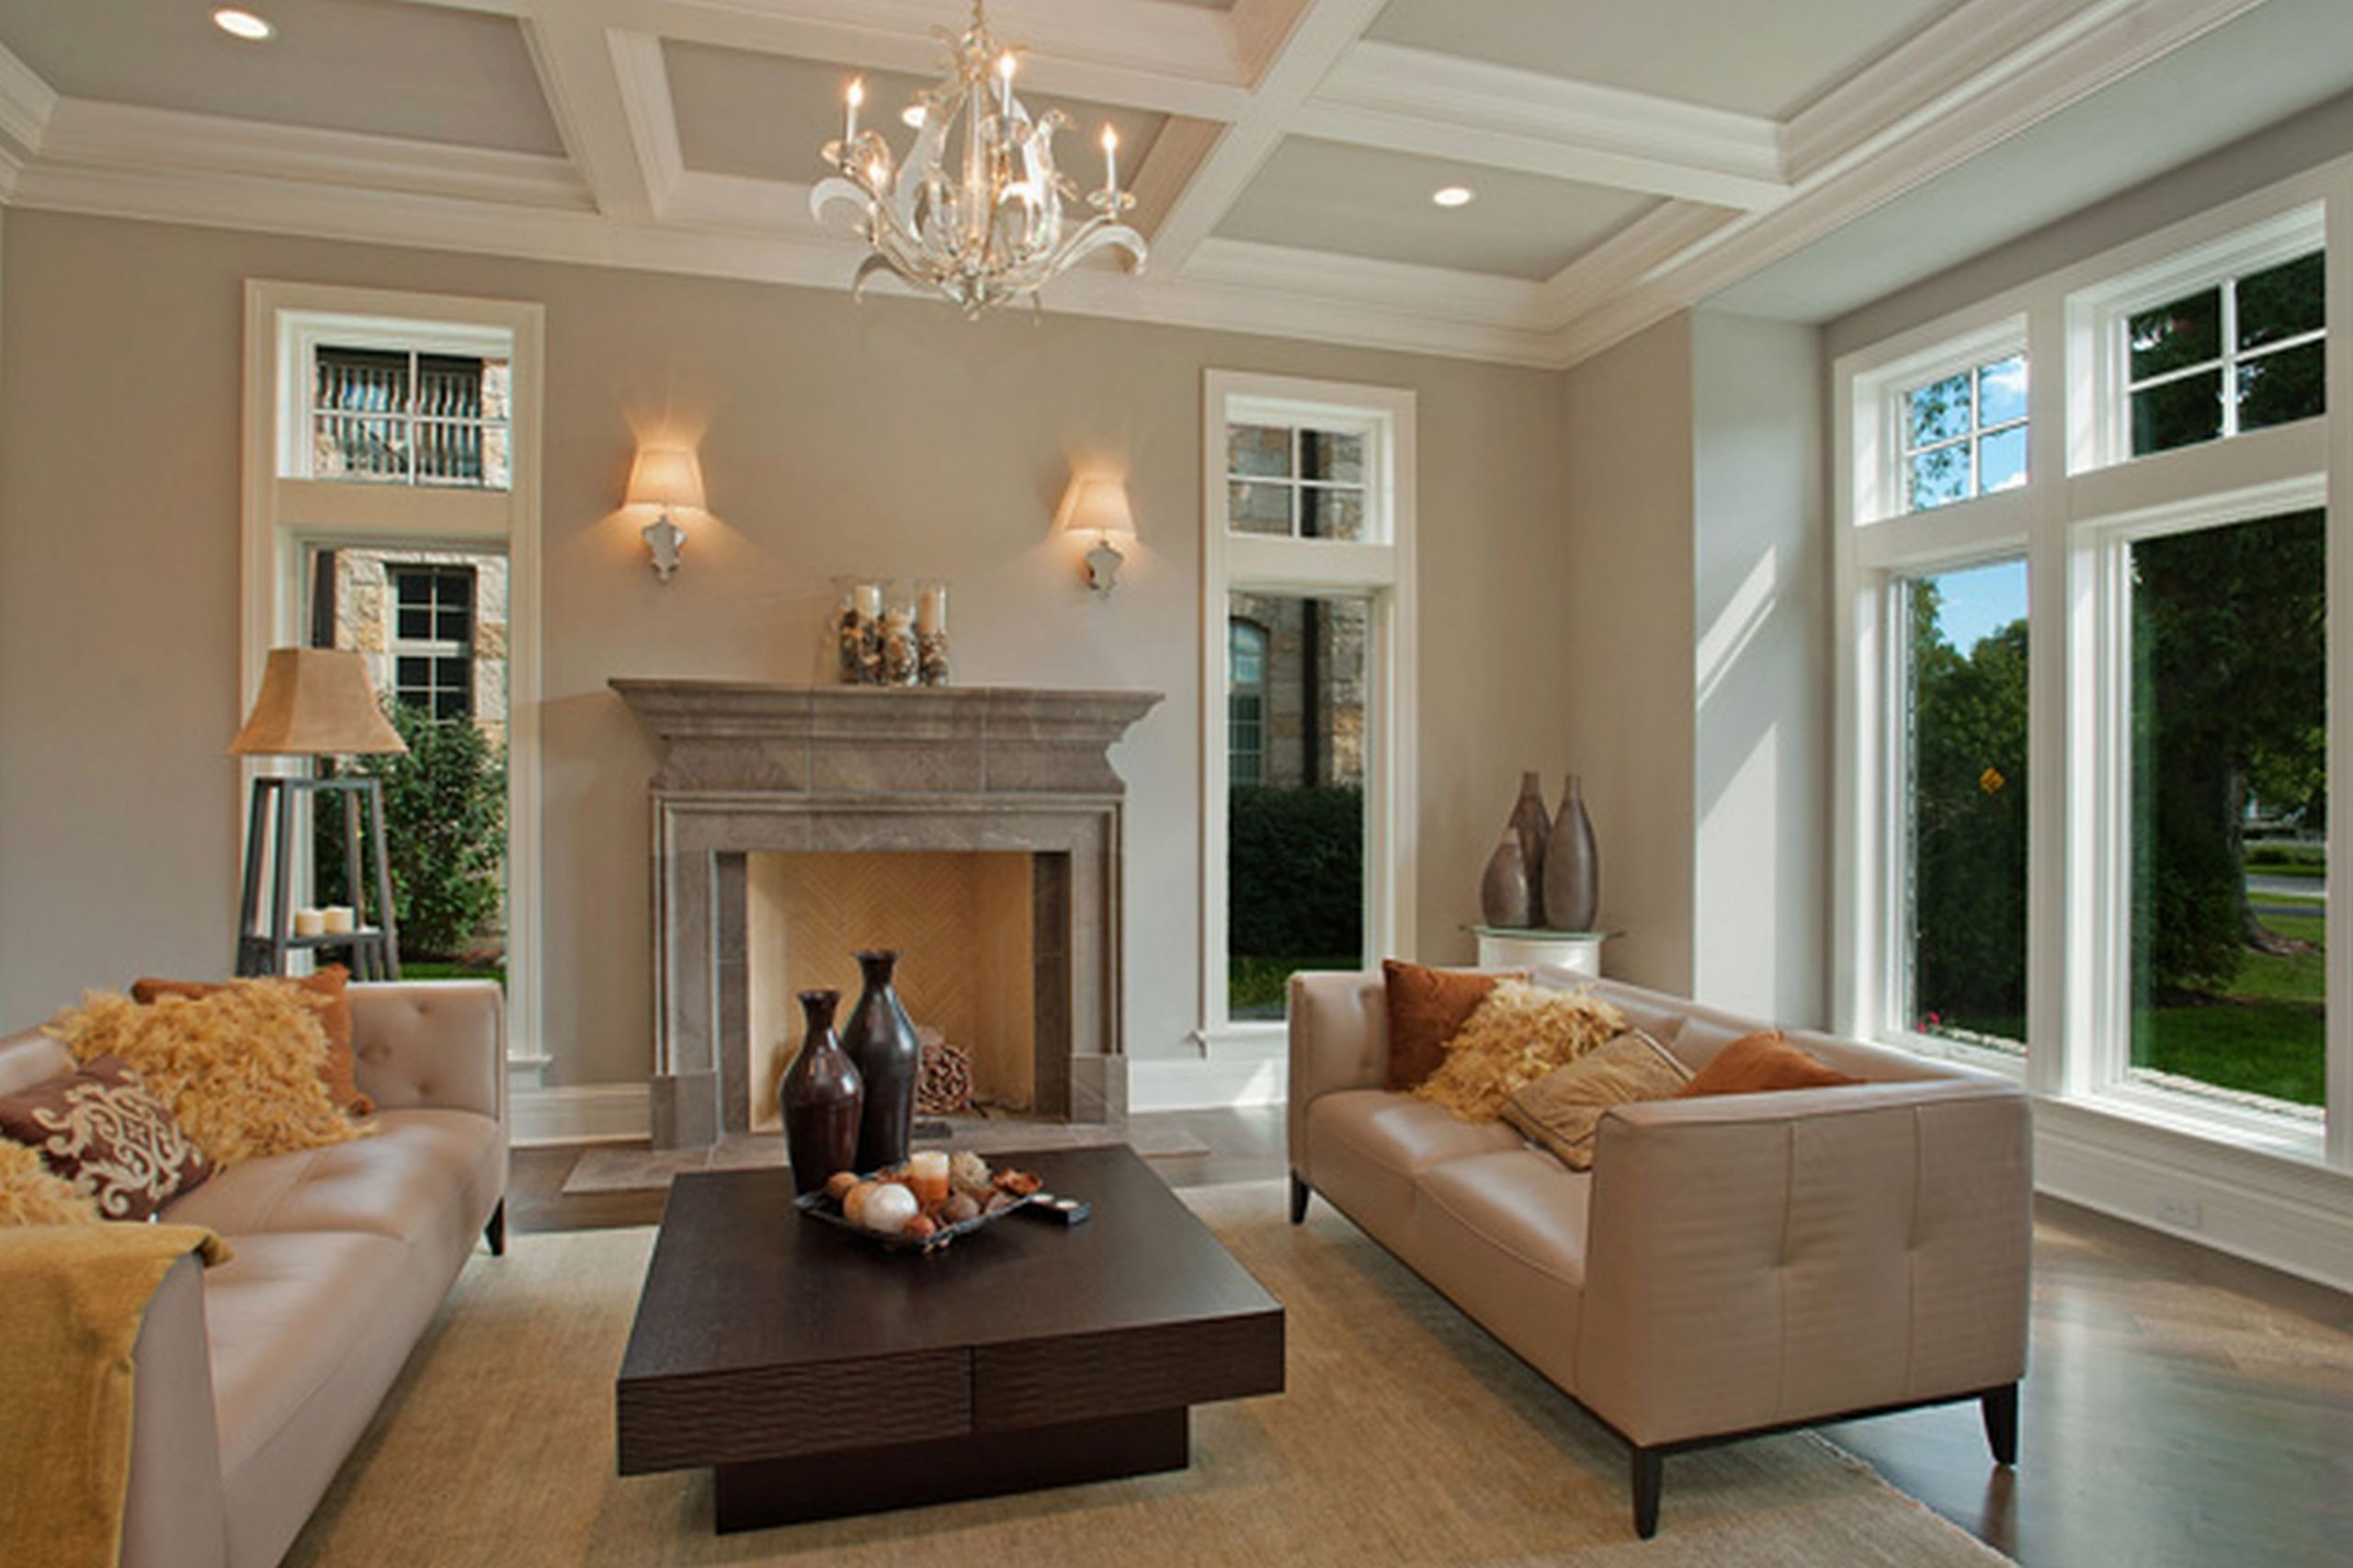 Neutral Living Room Colors
 Neutral Paint Colors For Living Room A Perfect For Home s